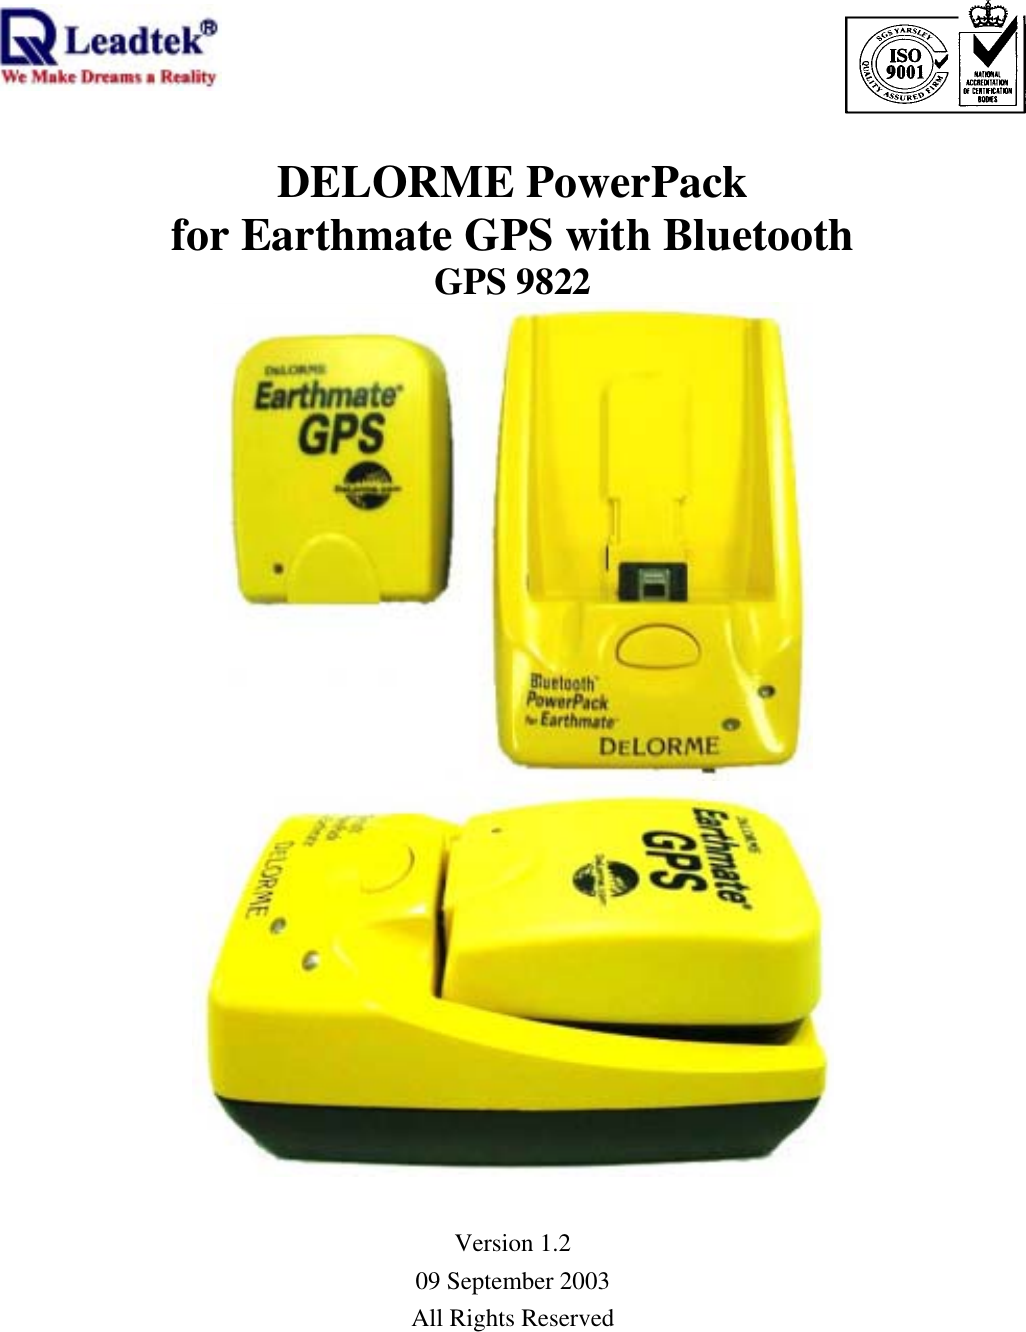                                                                                DELORME PowerPack   for Earthmate GPS with Bluetooth GPS 9822    Version 1.2 09 September 2003 All Rights Reserved 